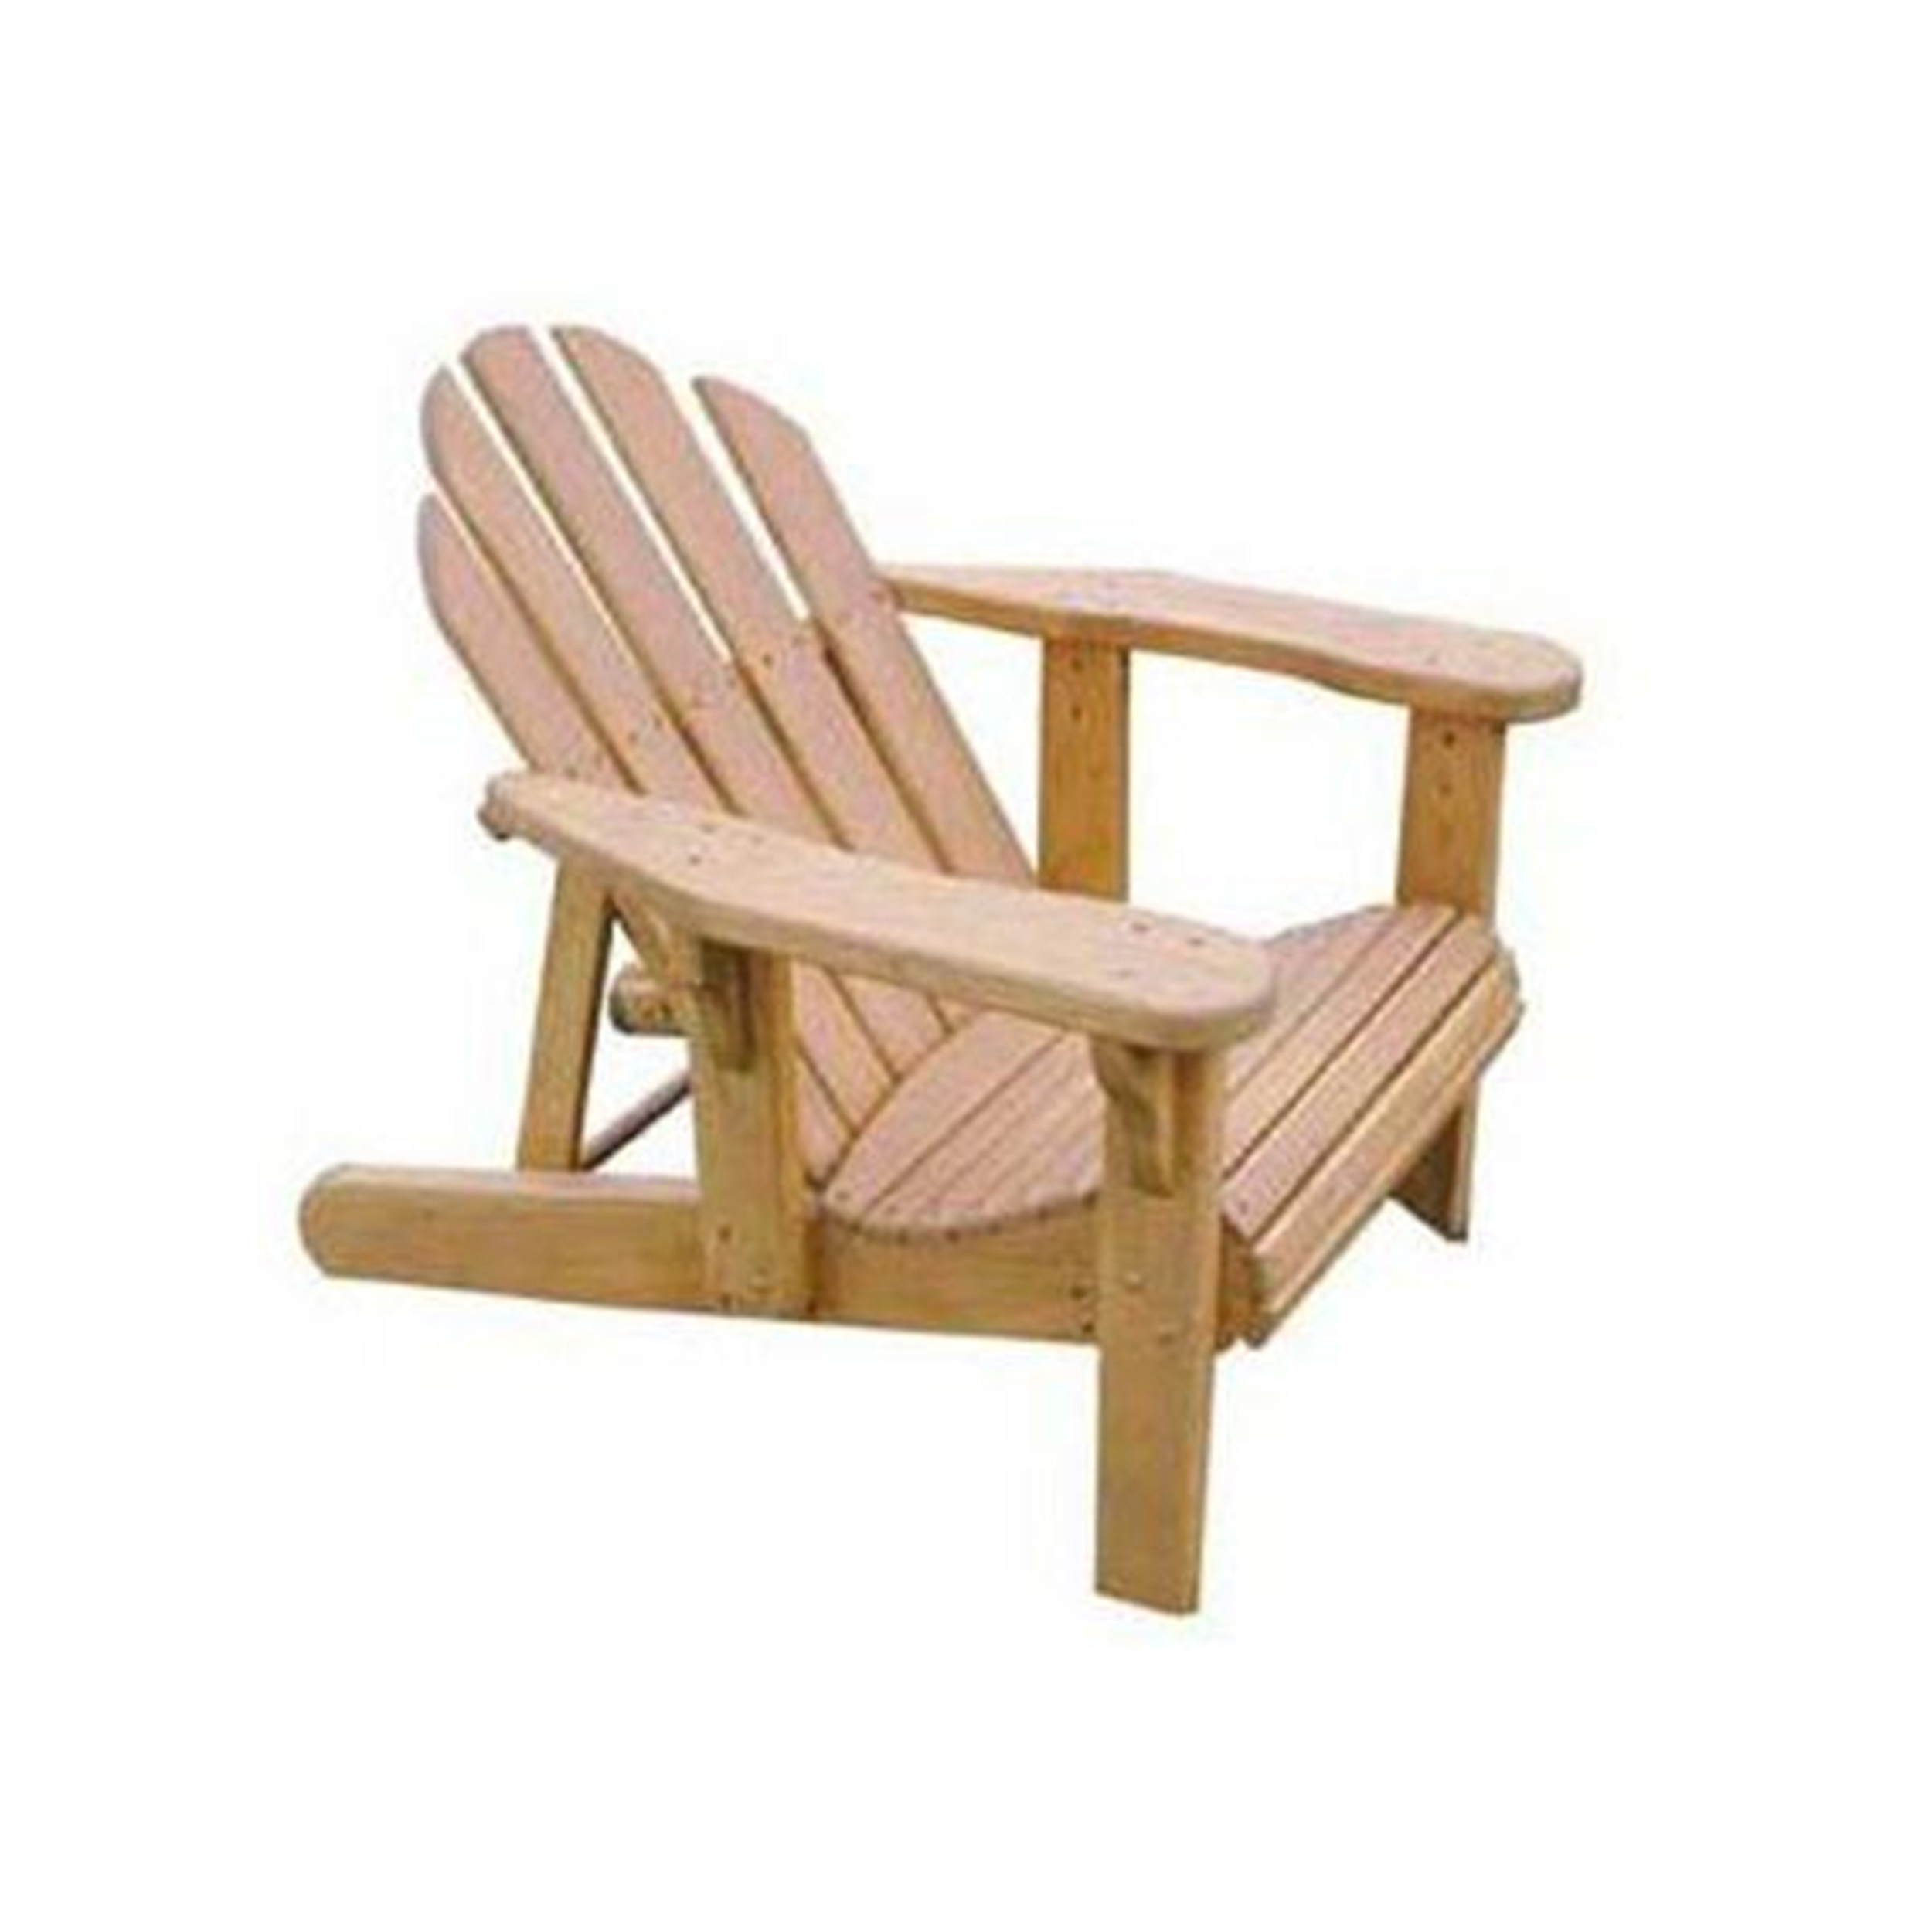 Woodworking Project Paper Plan To Build Adjustable Adirondack Chair